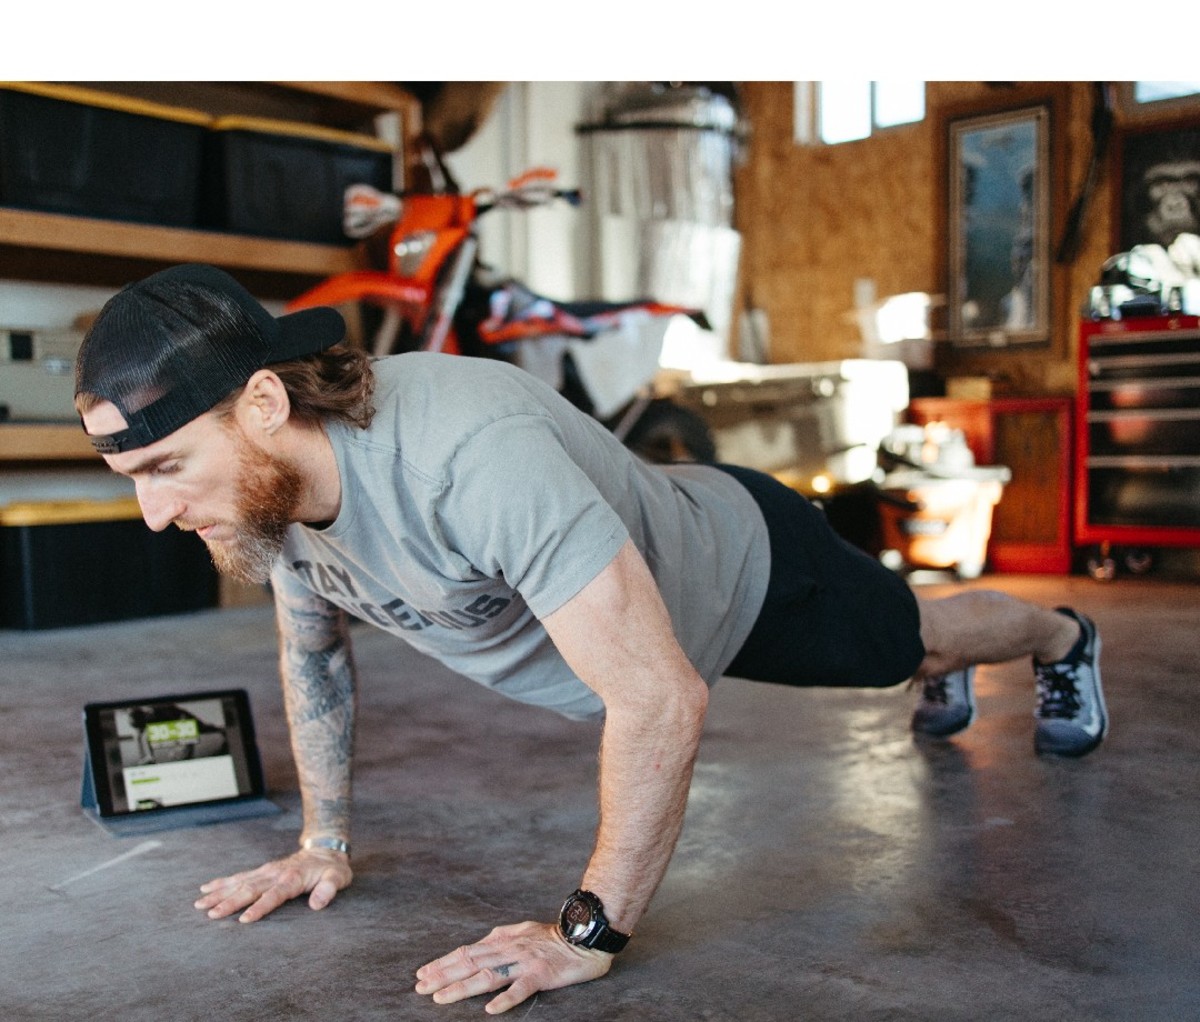 Guy in pushup position in garage with tablet in background.